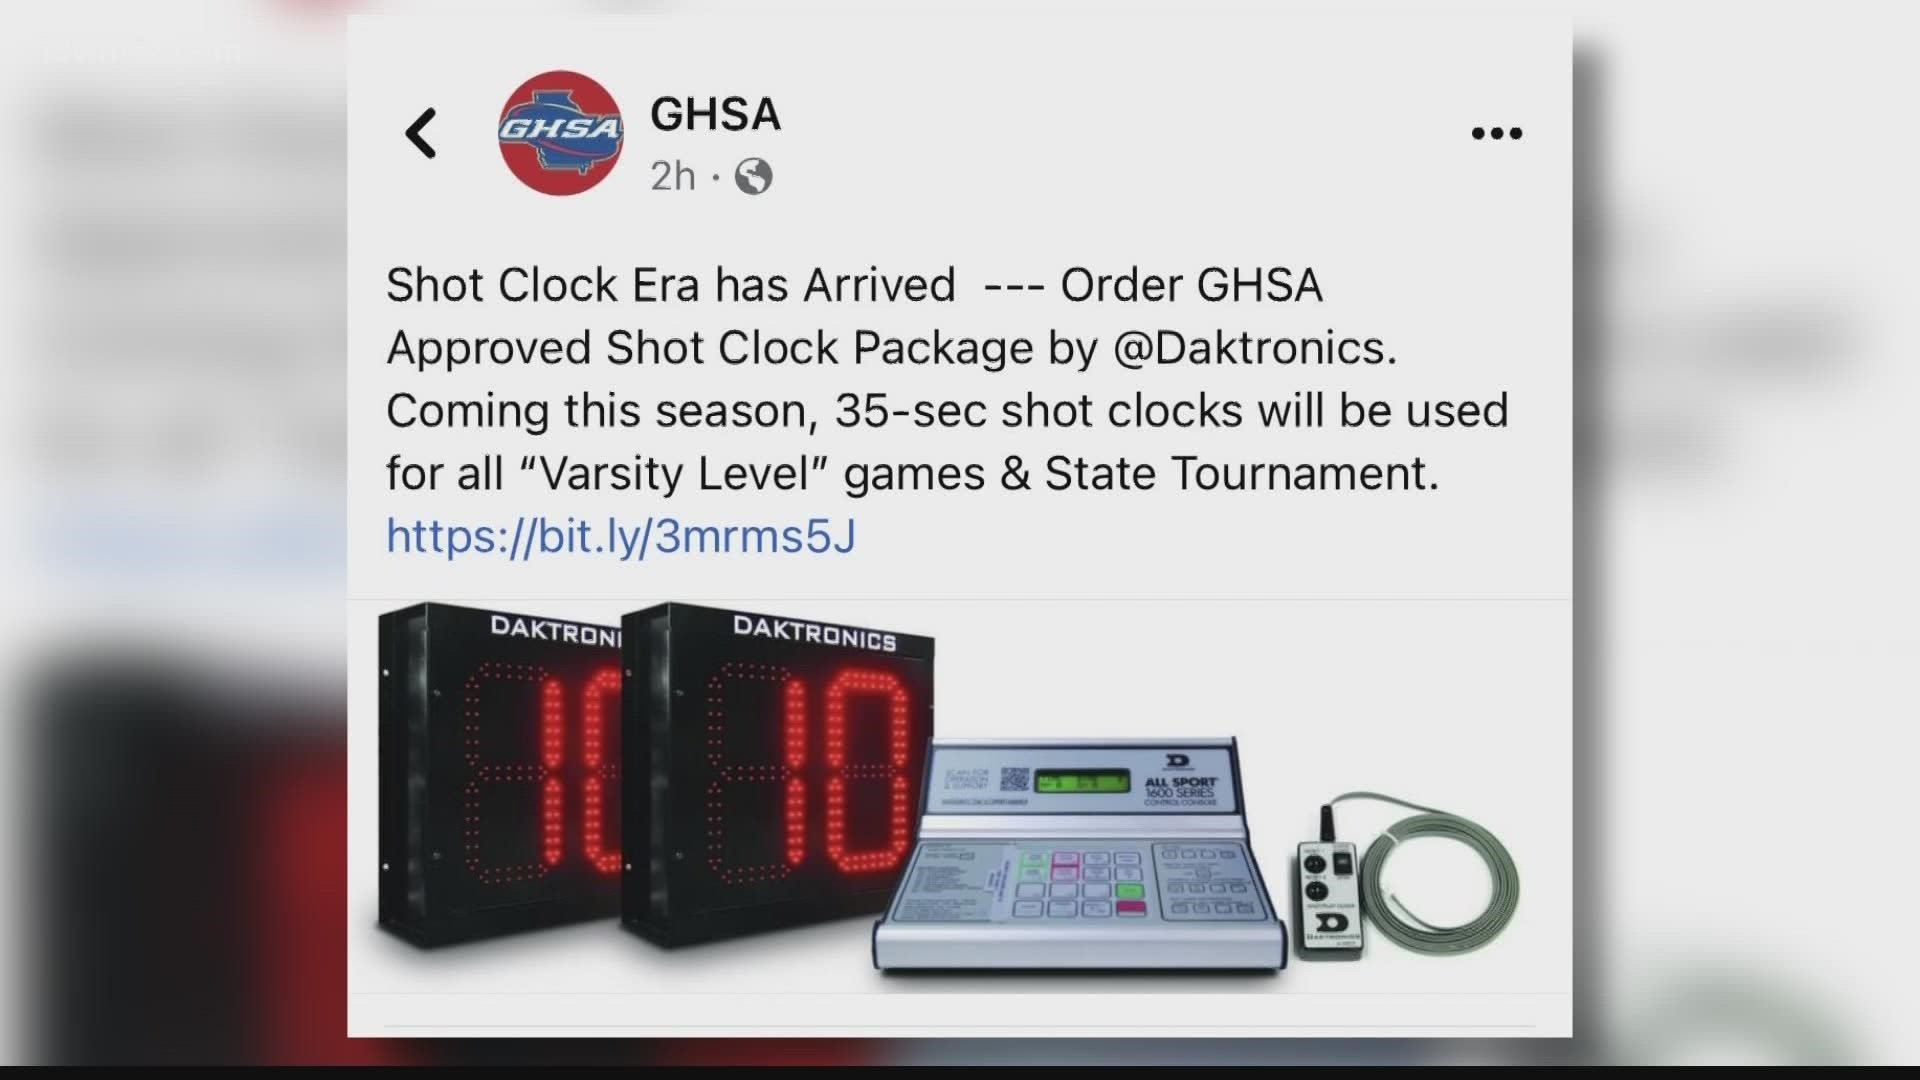 Earlier this month, the Georgia High School Association announced that beginning this year, the shot clock will now be used for all varsity-level basketball games